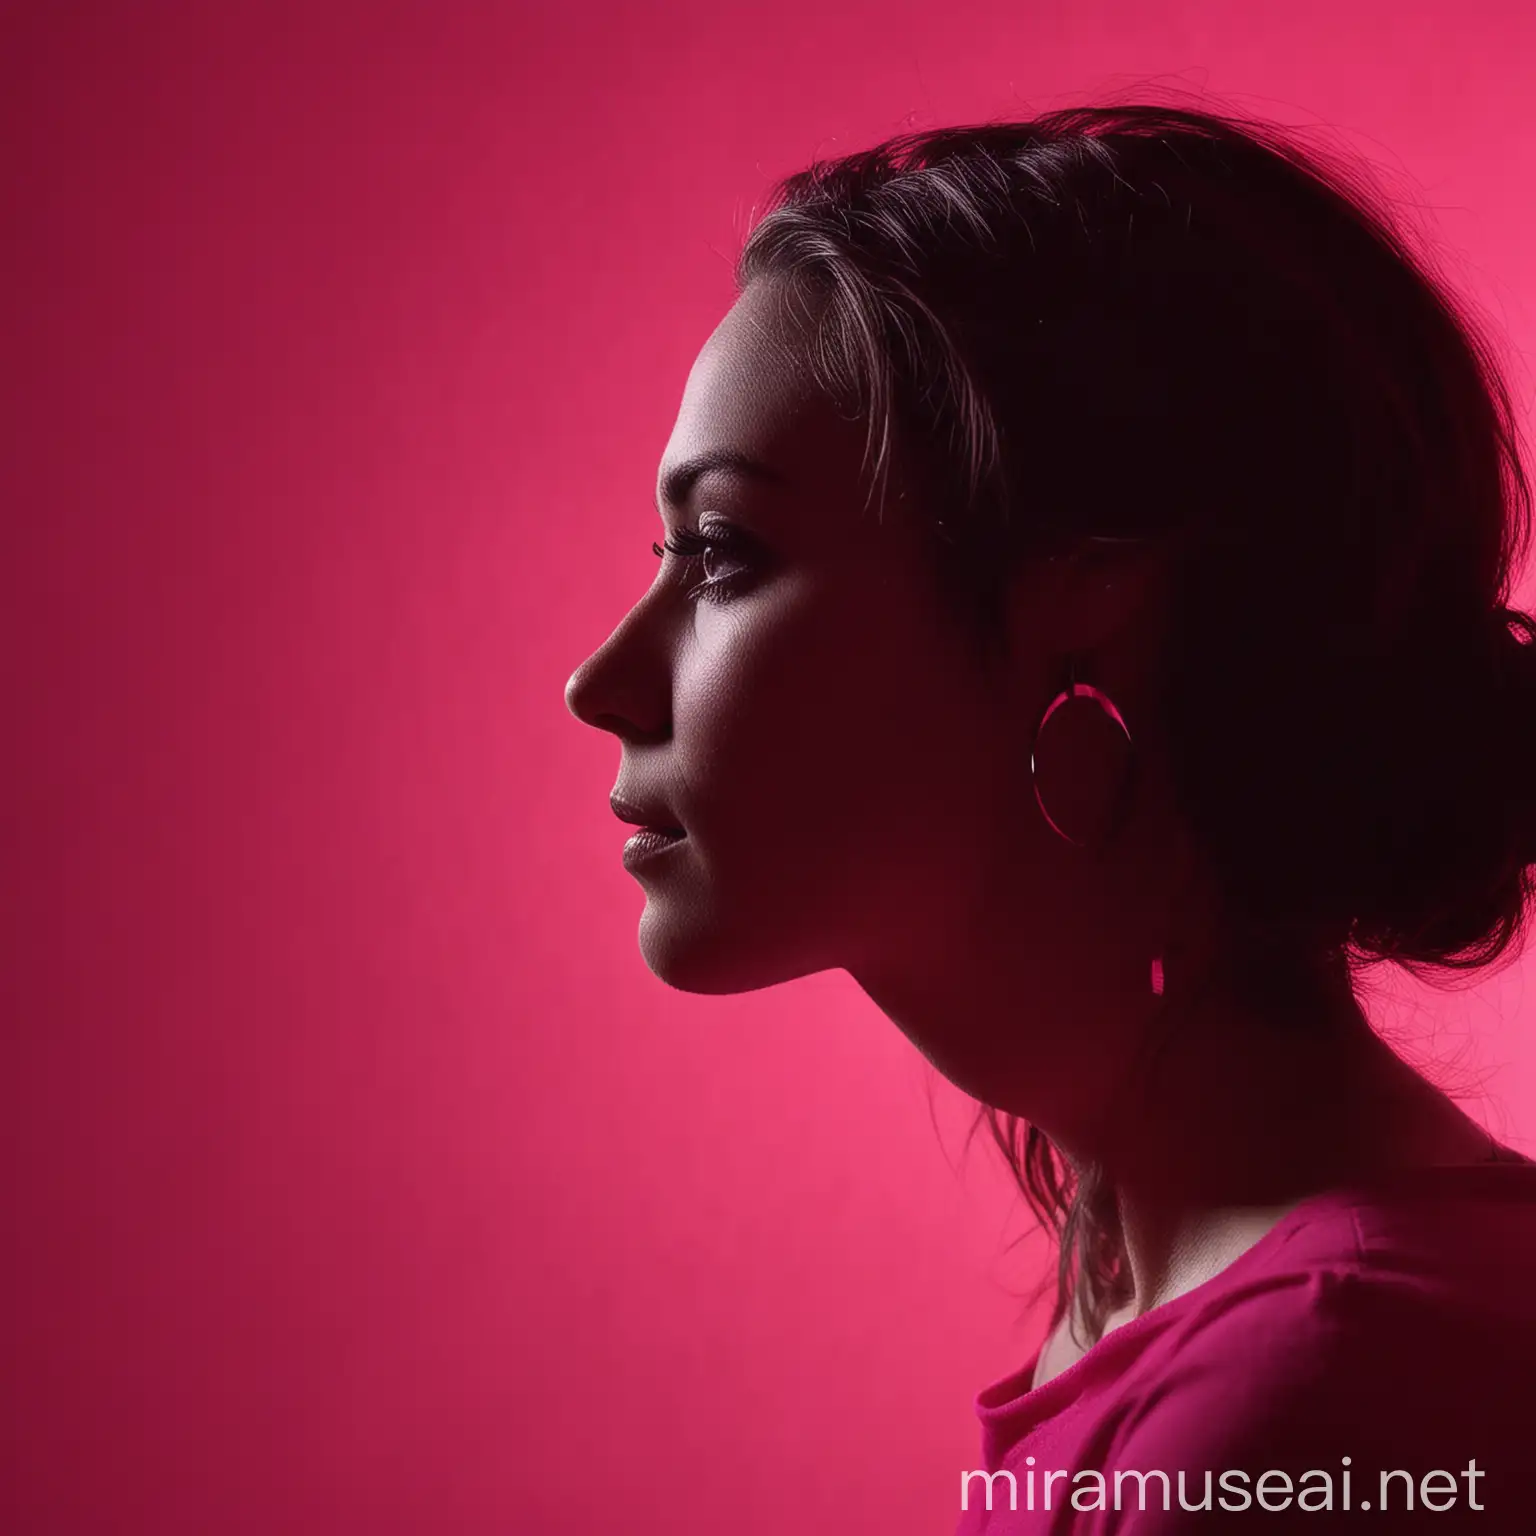 Silhouette of Woman Against Vibrant Hot Pink Backdrop